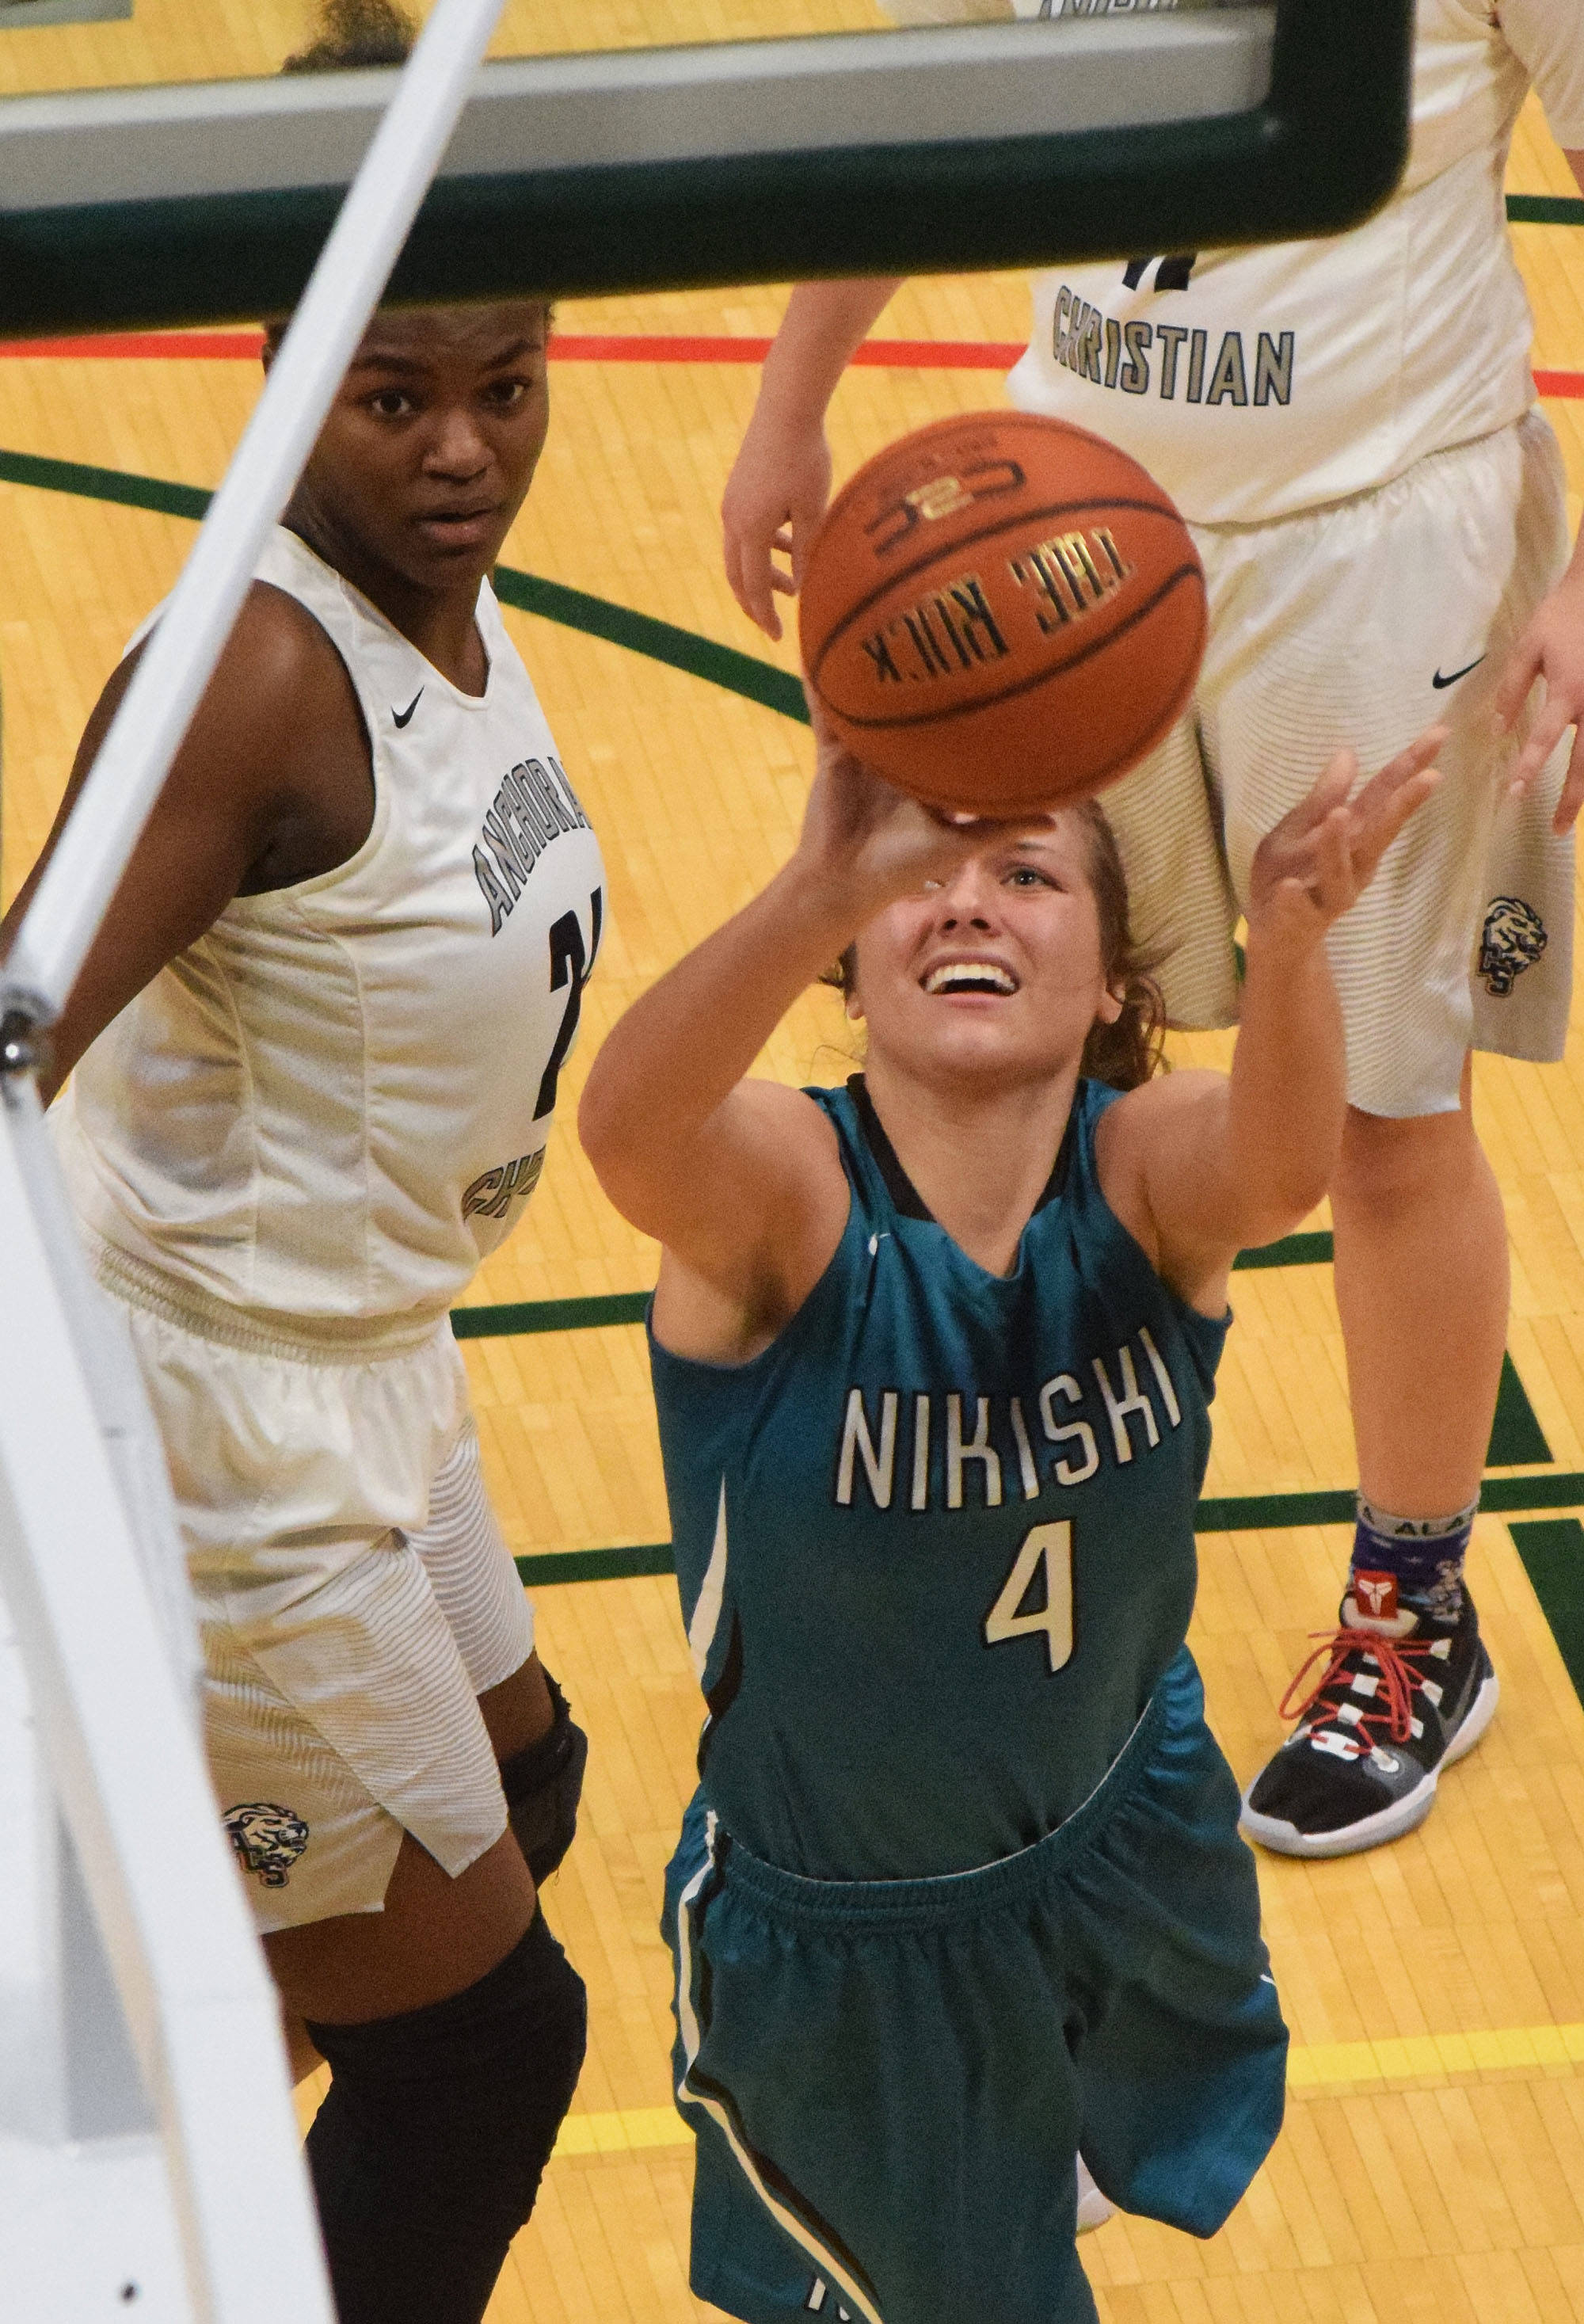 Nikiski’s Emma Wik lays in a shot in front of ACS’s Jordan Todd, Saturday, March 23, 2019, in the Class 3A girls state basketball championship at the Alaska Airlines Center in Anchorage. (Photo by Joey Klecka/Peninsula Clarion)